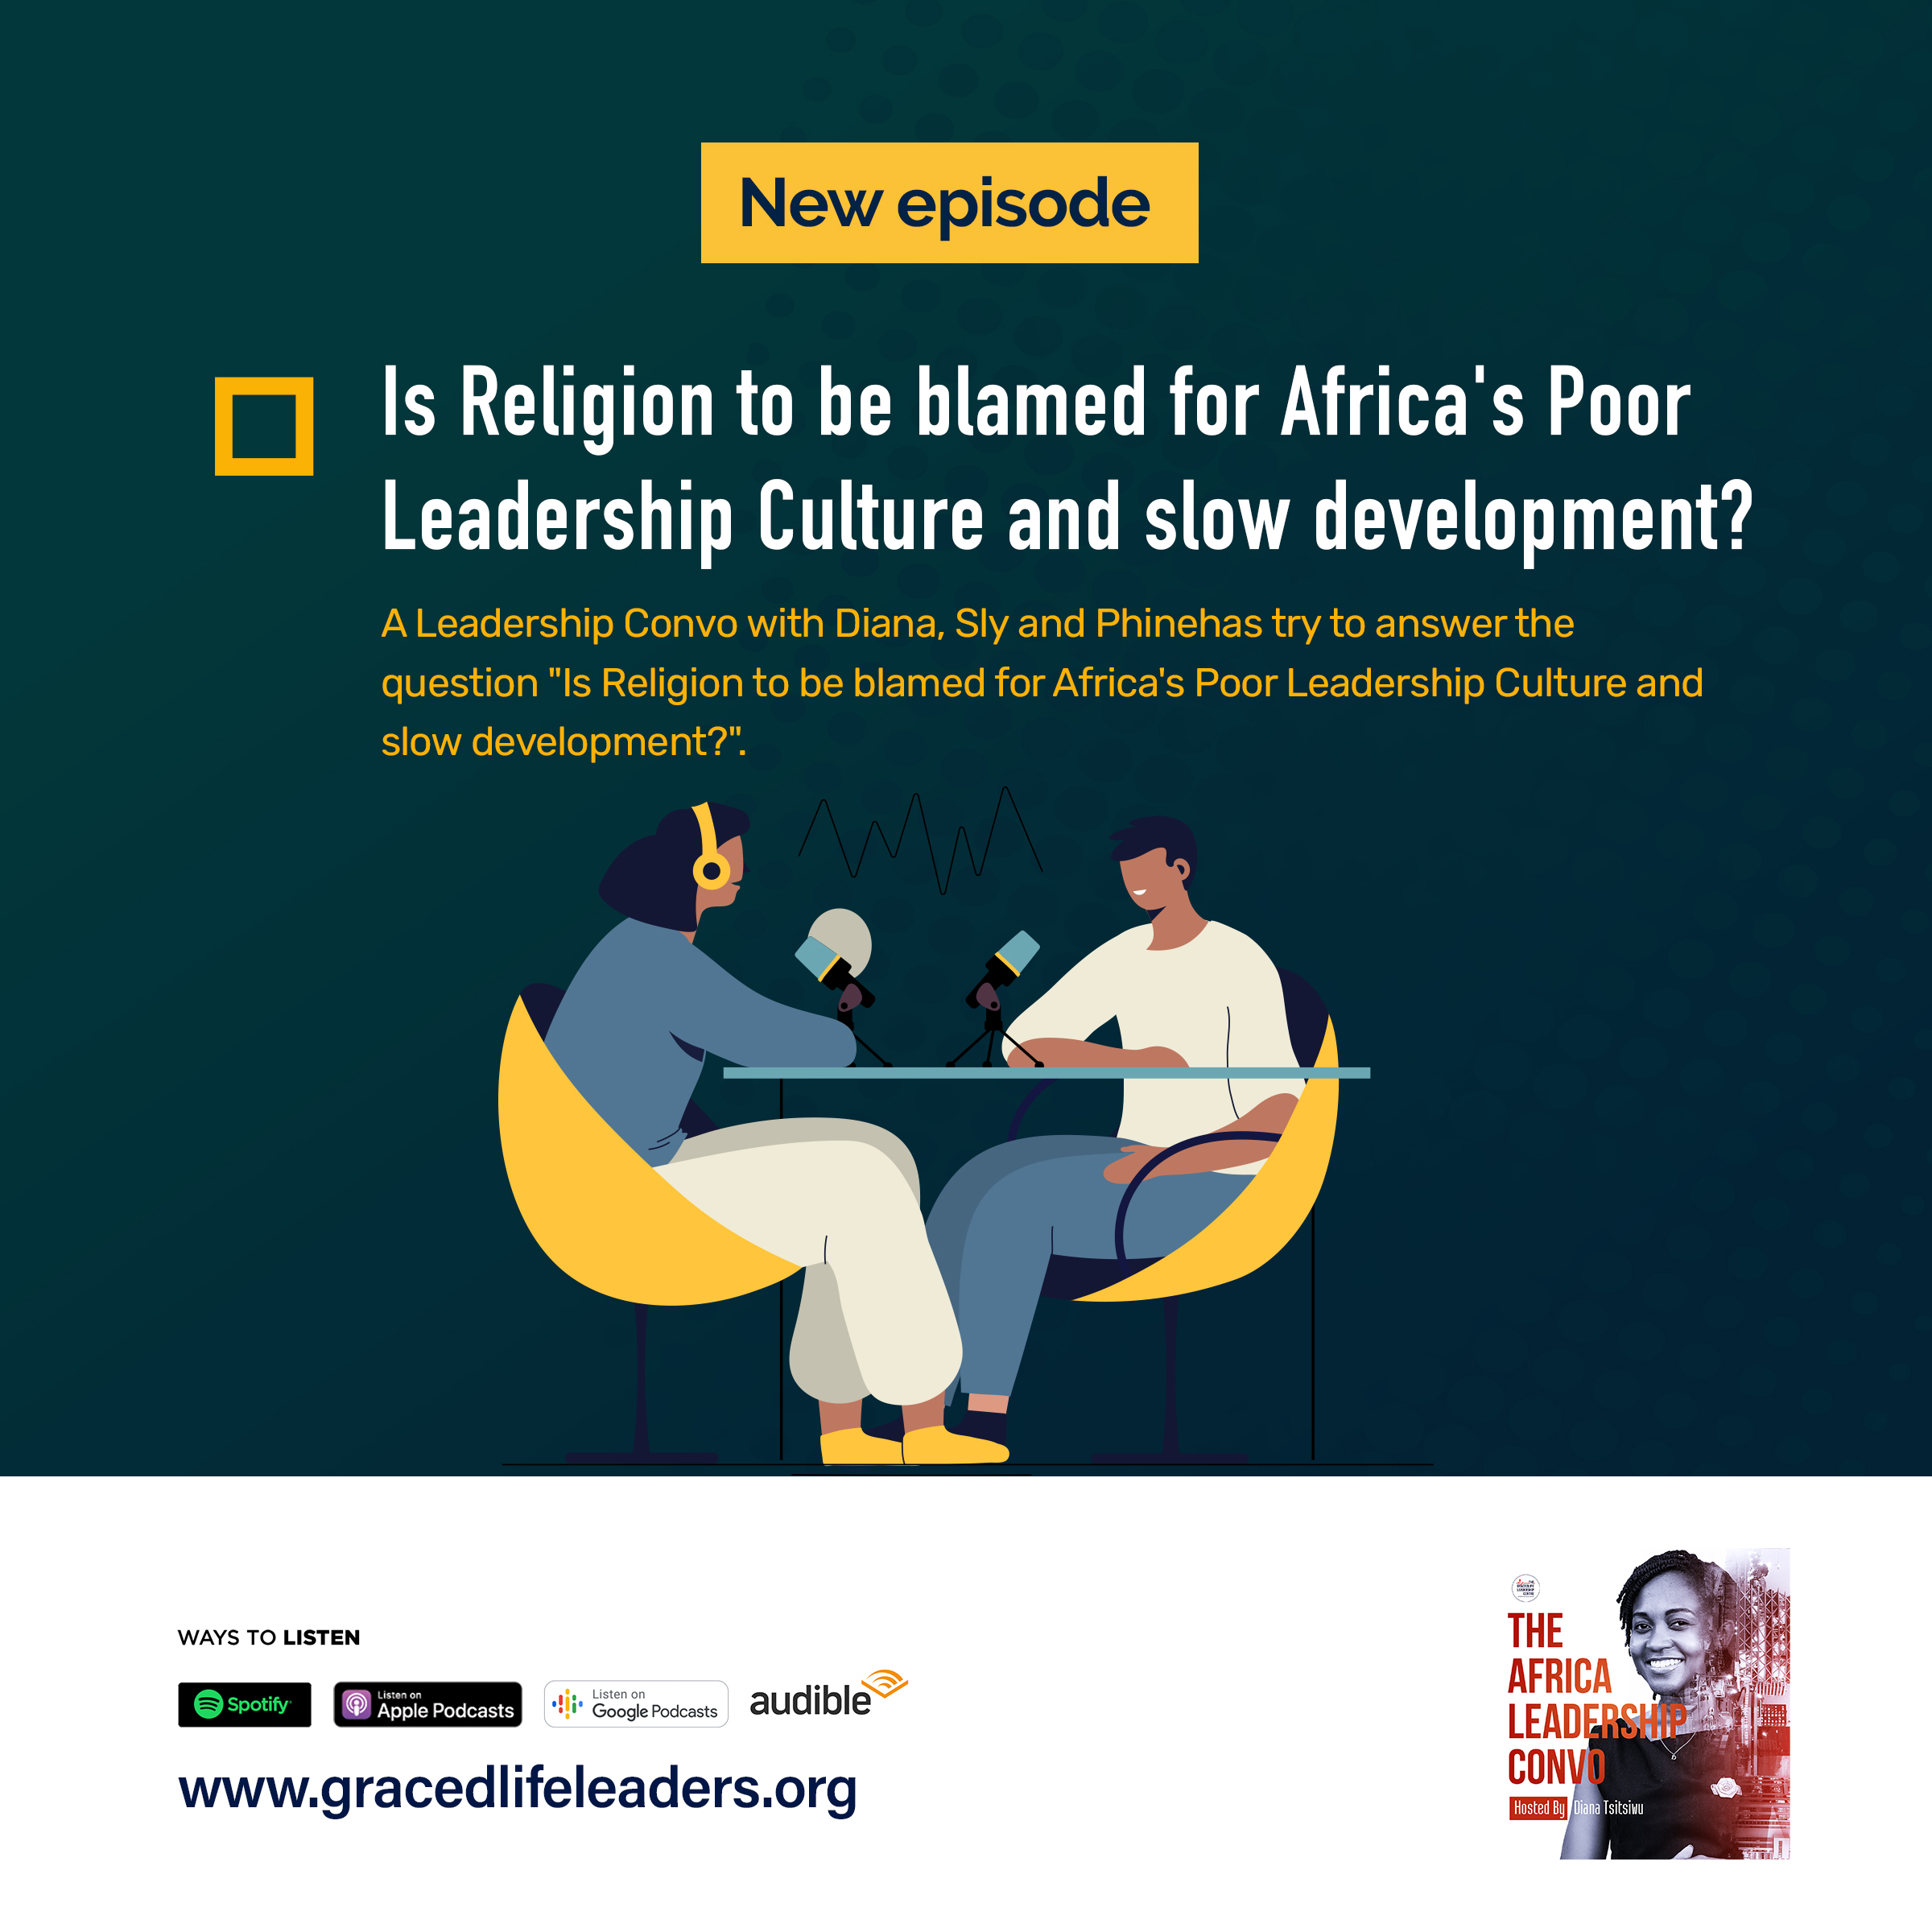 Is Religion to be blamed for Africa's Poor Leadership Culture and slow development?